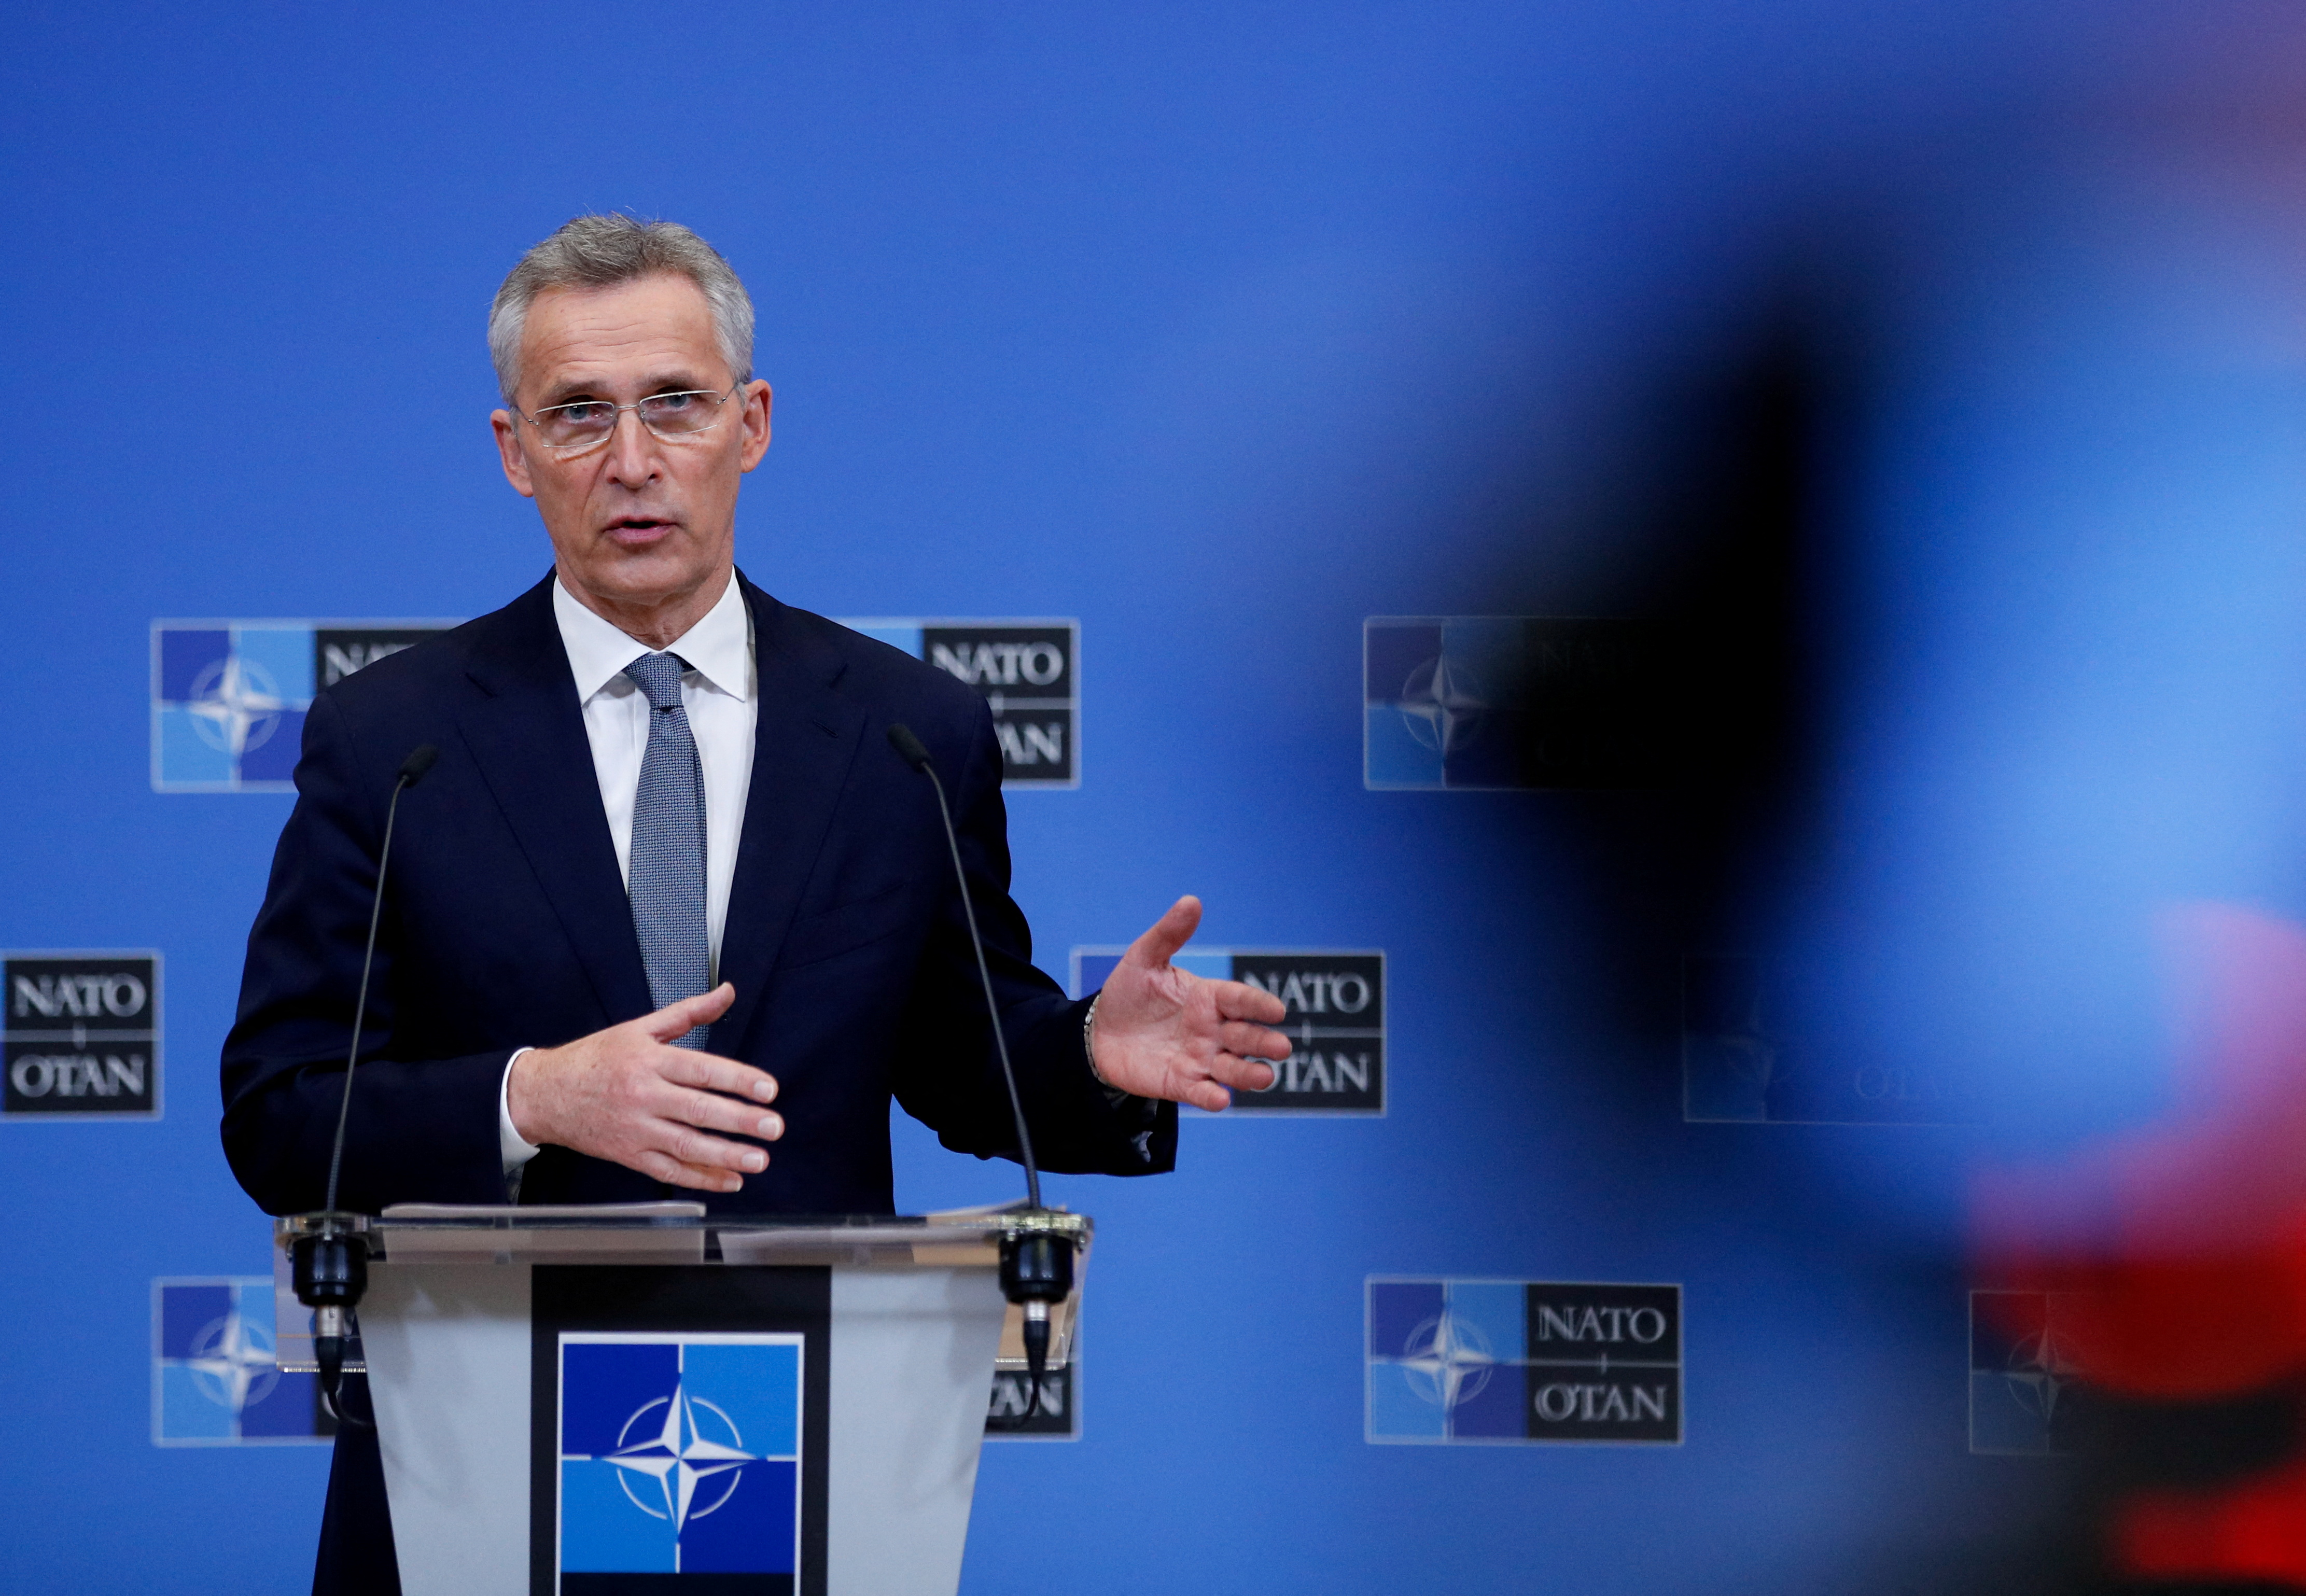 NATO Secretary-General Jens Stoltenberg gestures as he gives a news conference ahead of a meeting of NATO defence ministers in Brussels, Belgium, on February 15.